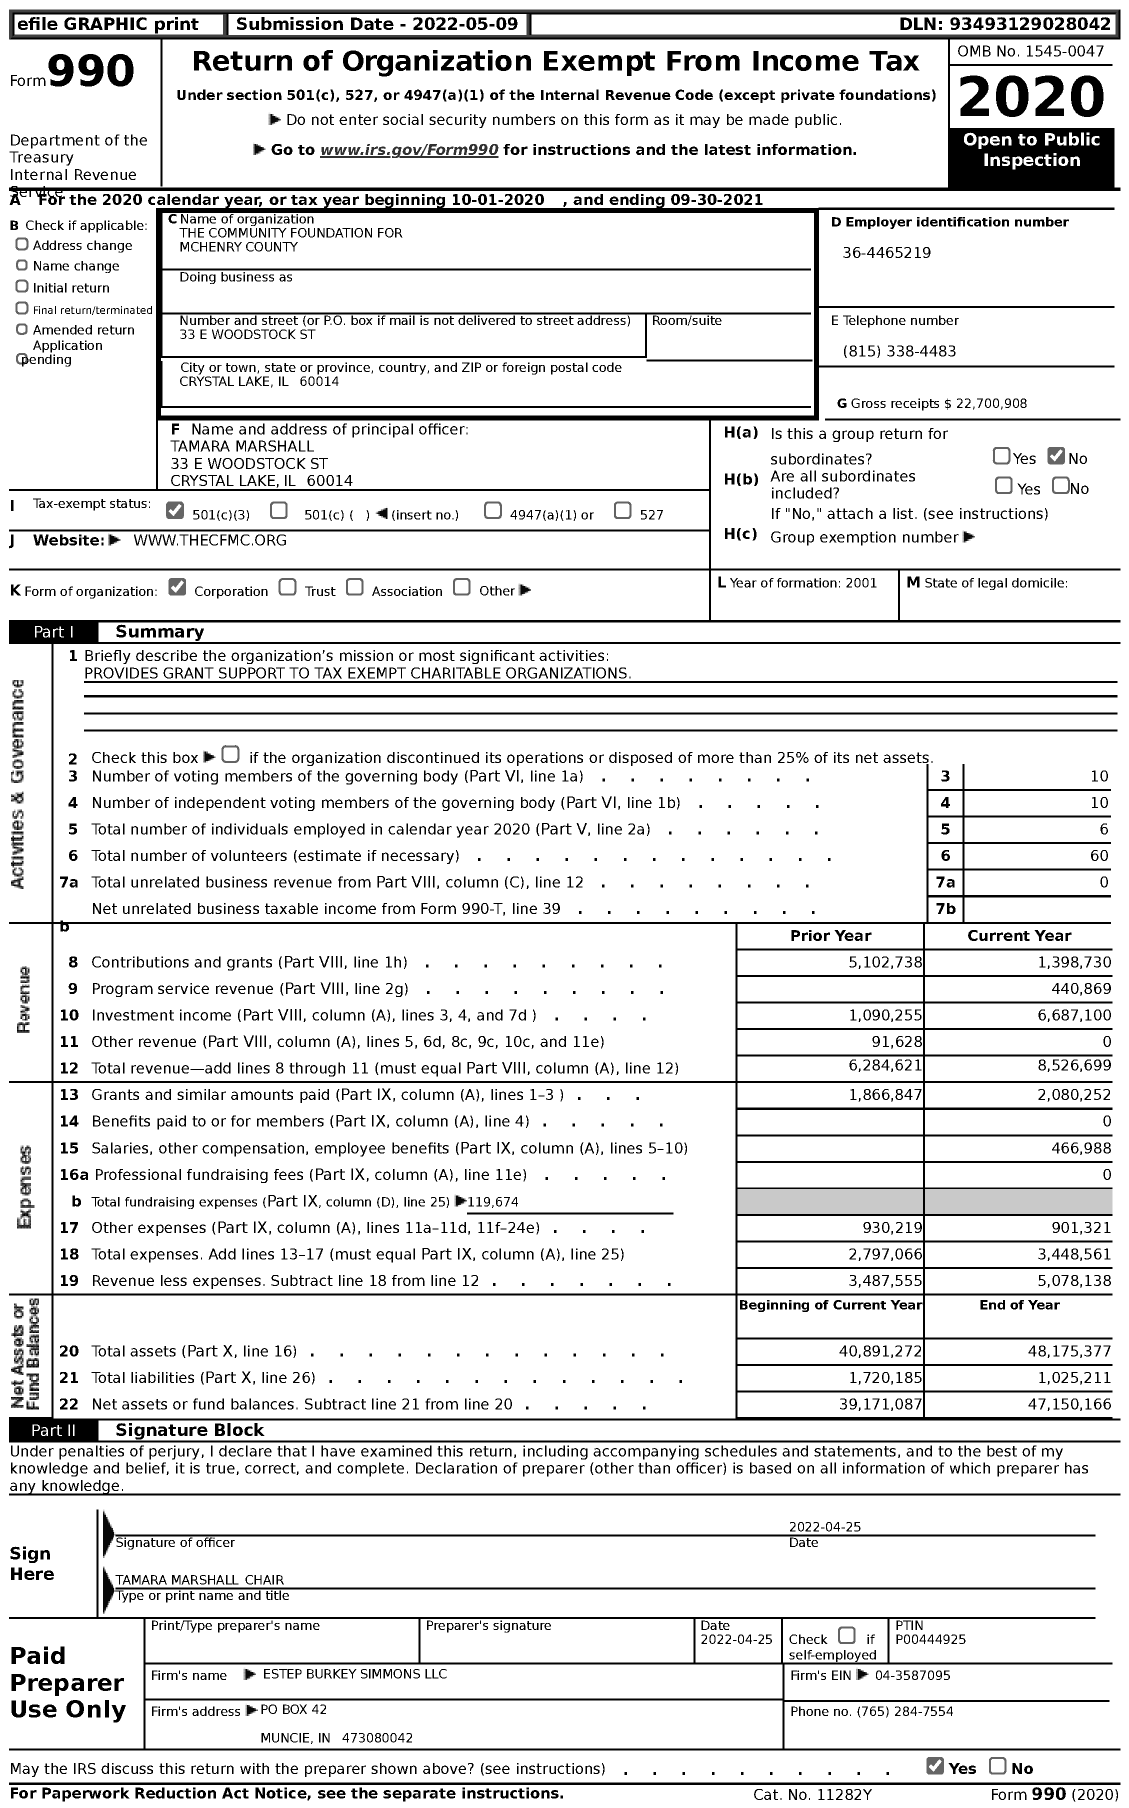 Image of first page of 2020 Form 990 for Community Foundation for McHenry County